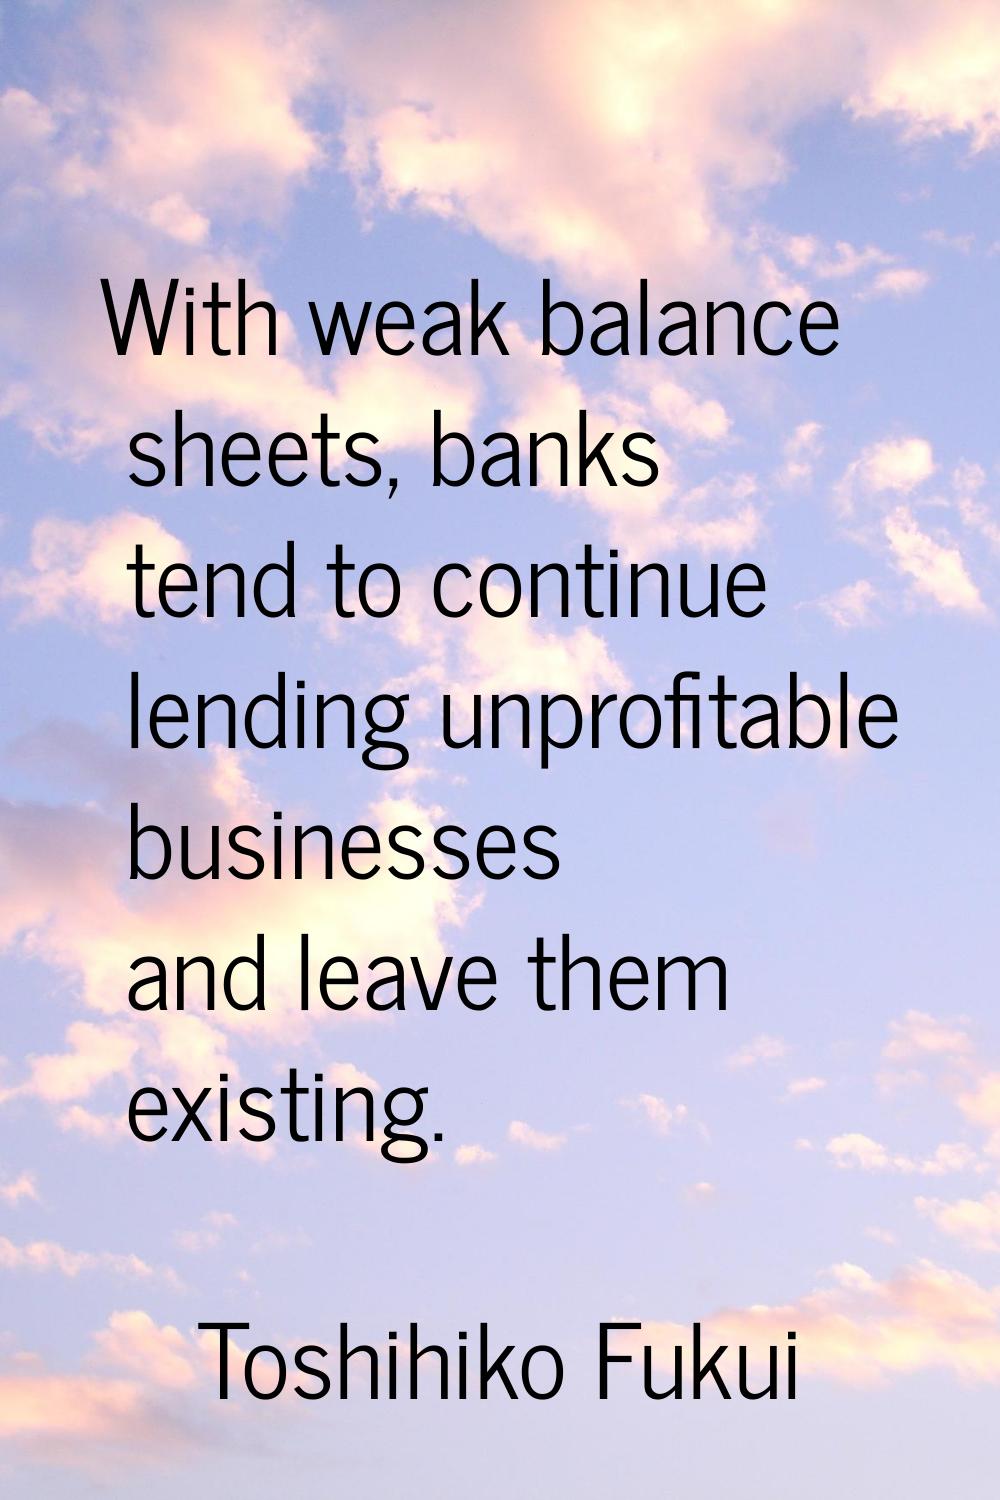 With weak balance sheets, banks tend to continue lending unprofitable businesses and leave them exi